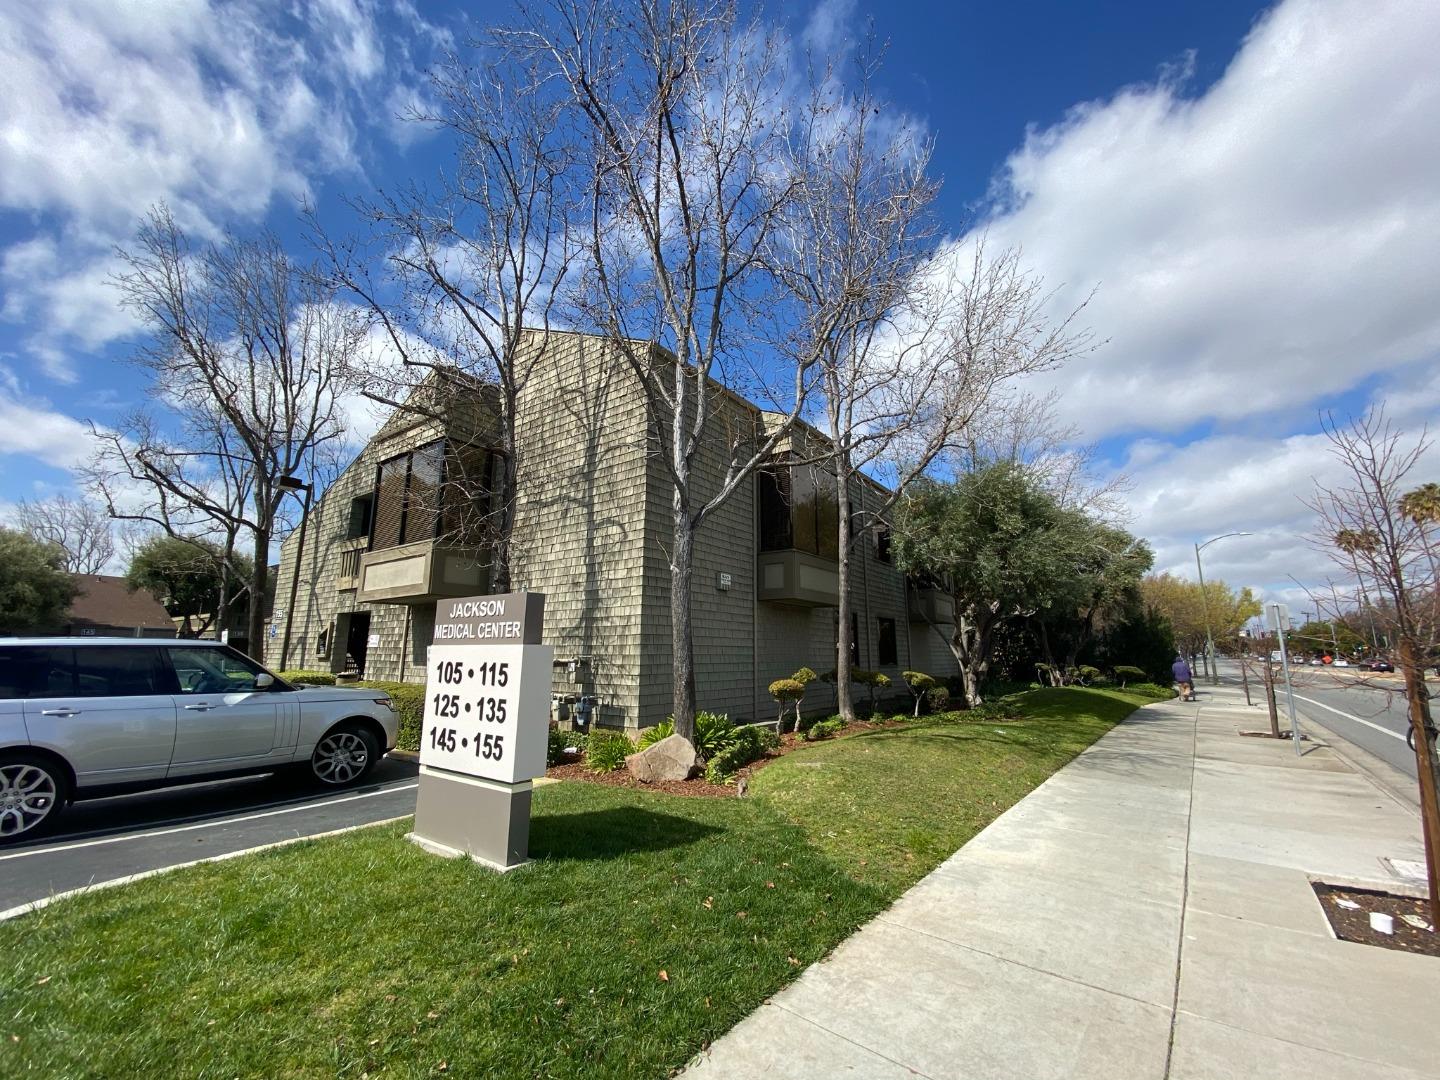 Photo of 135 N Jackson Ave #202 in San Jose, CA